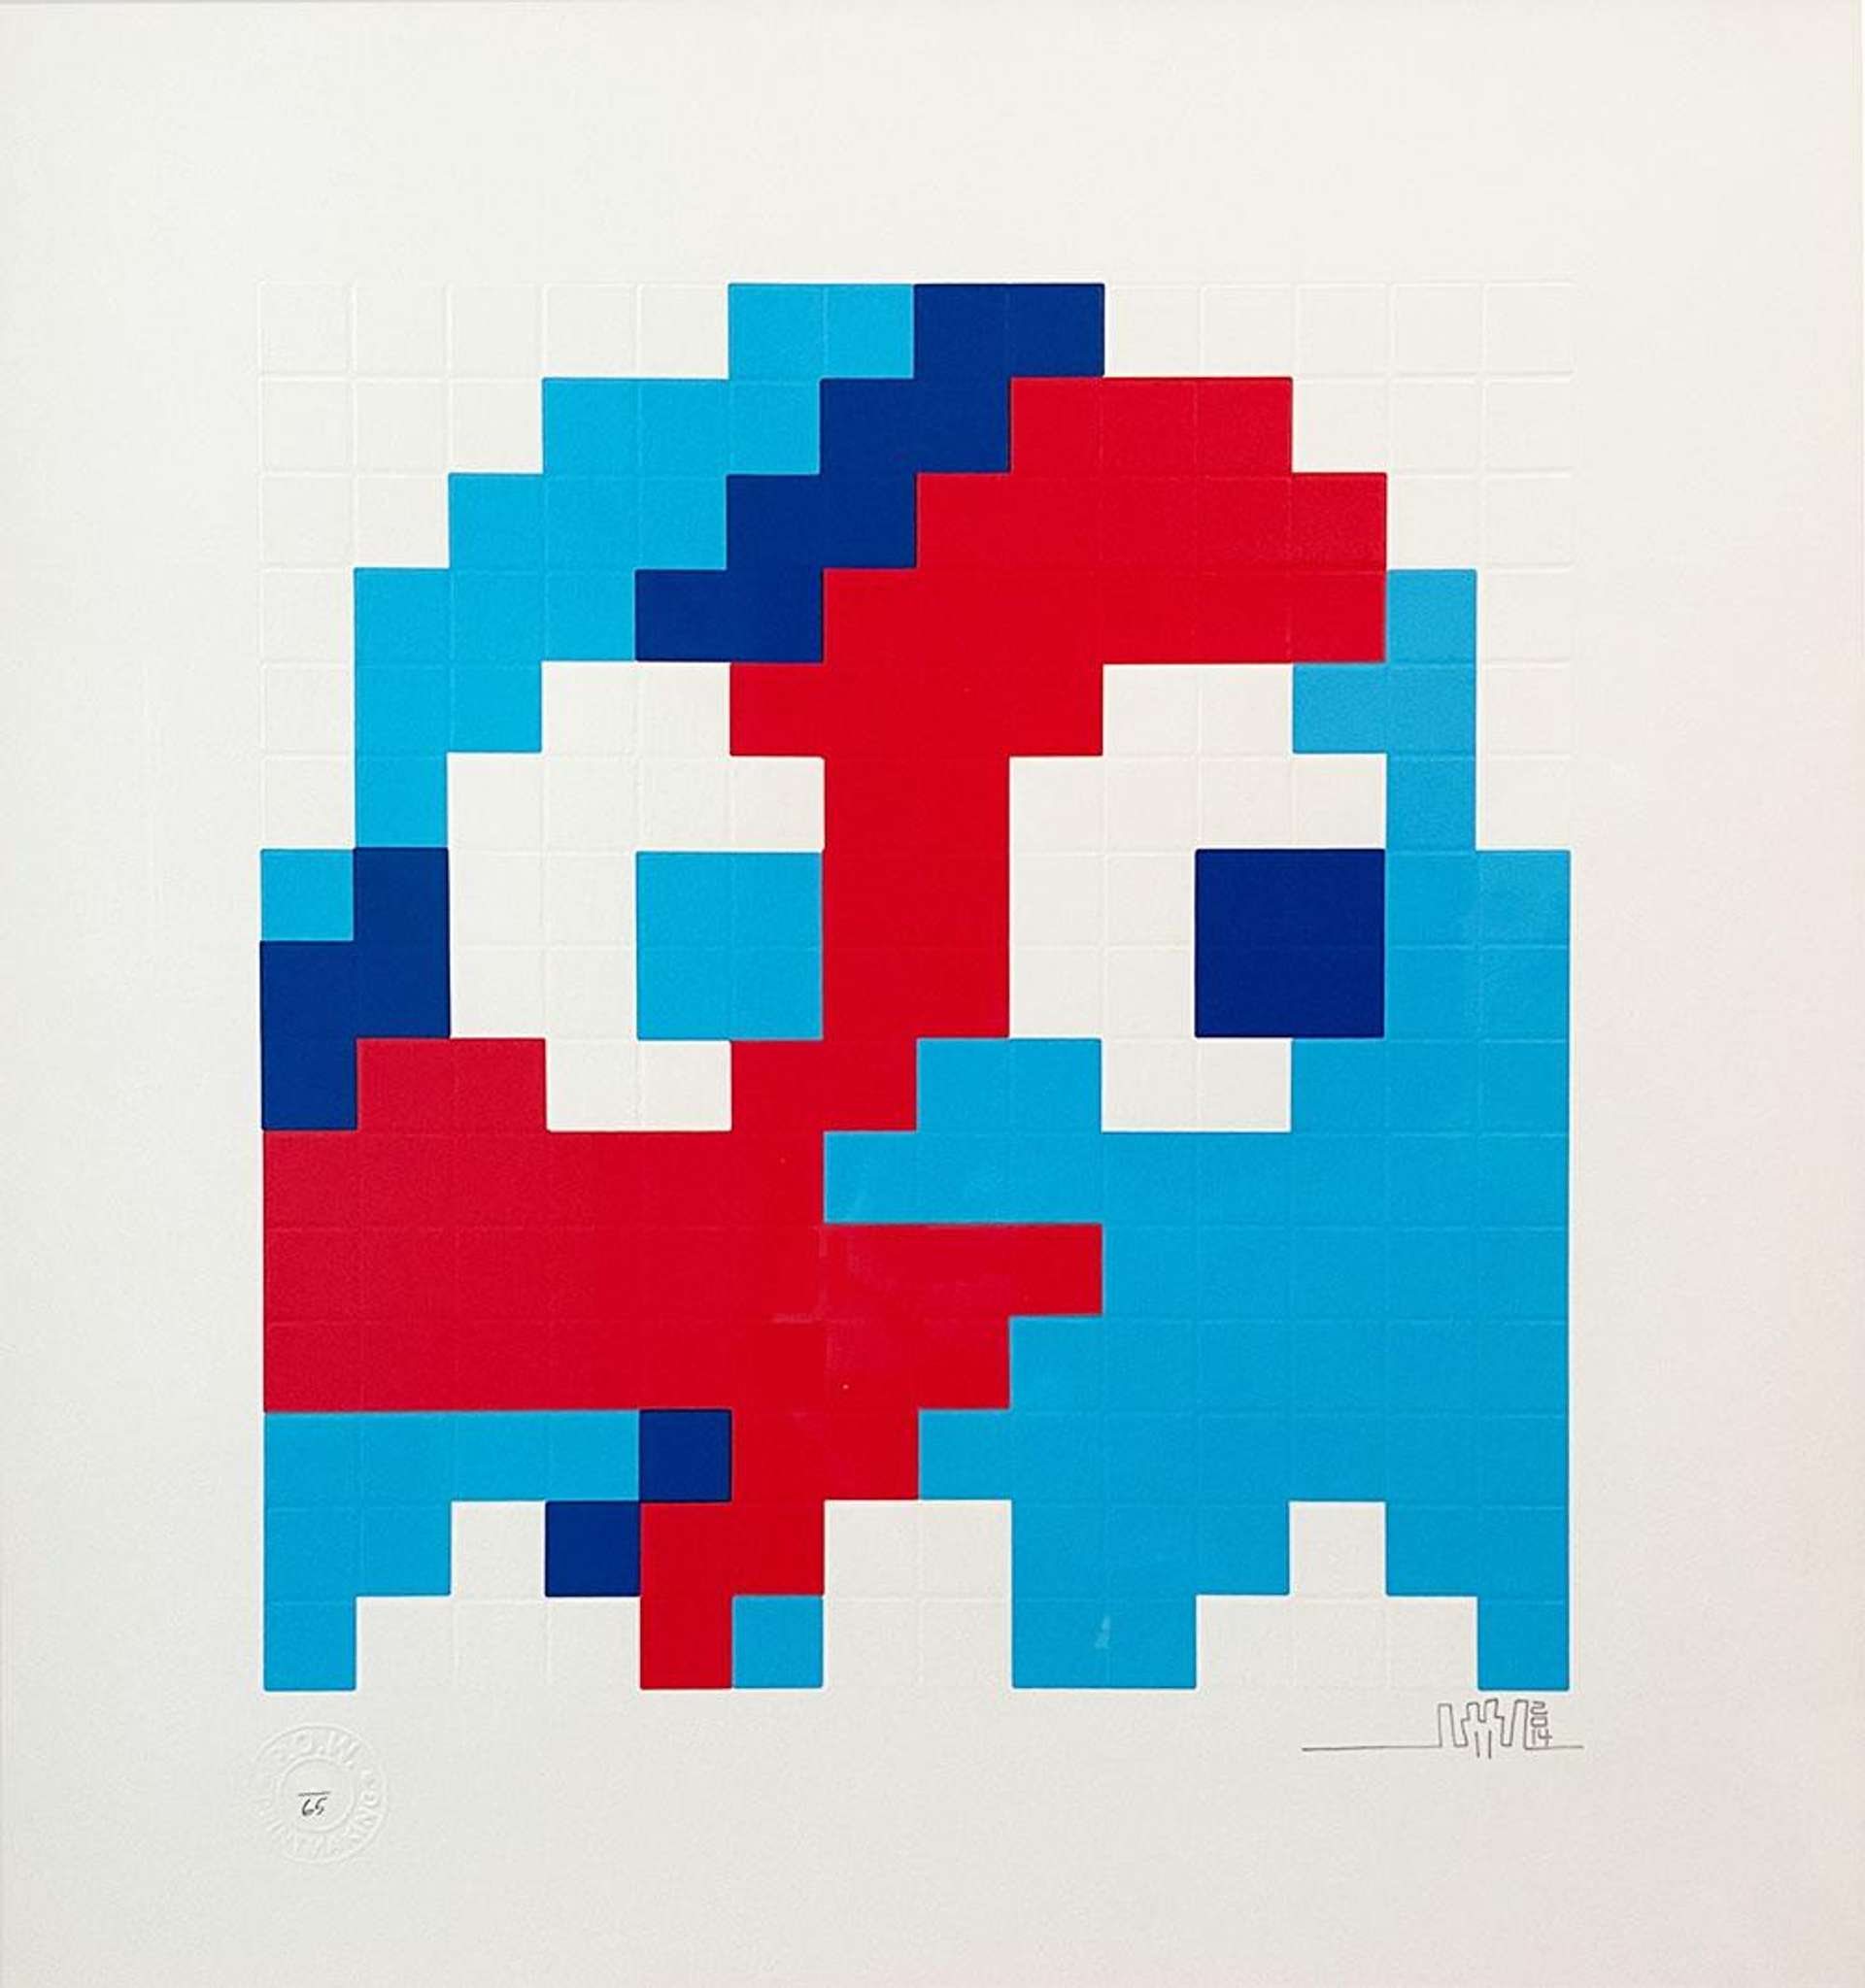 A screenprint by Invader depicting a Space Invader character with the iconic David Bowie lightning strike